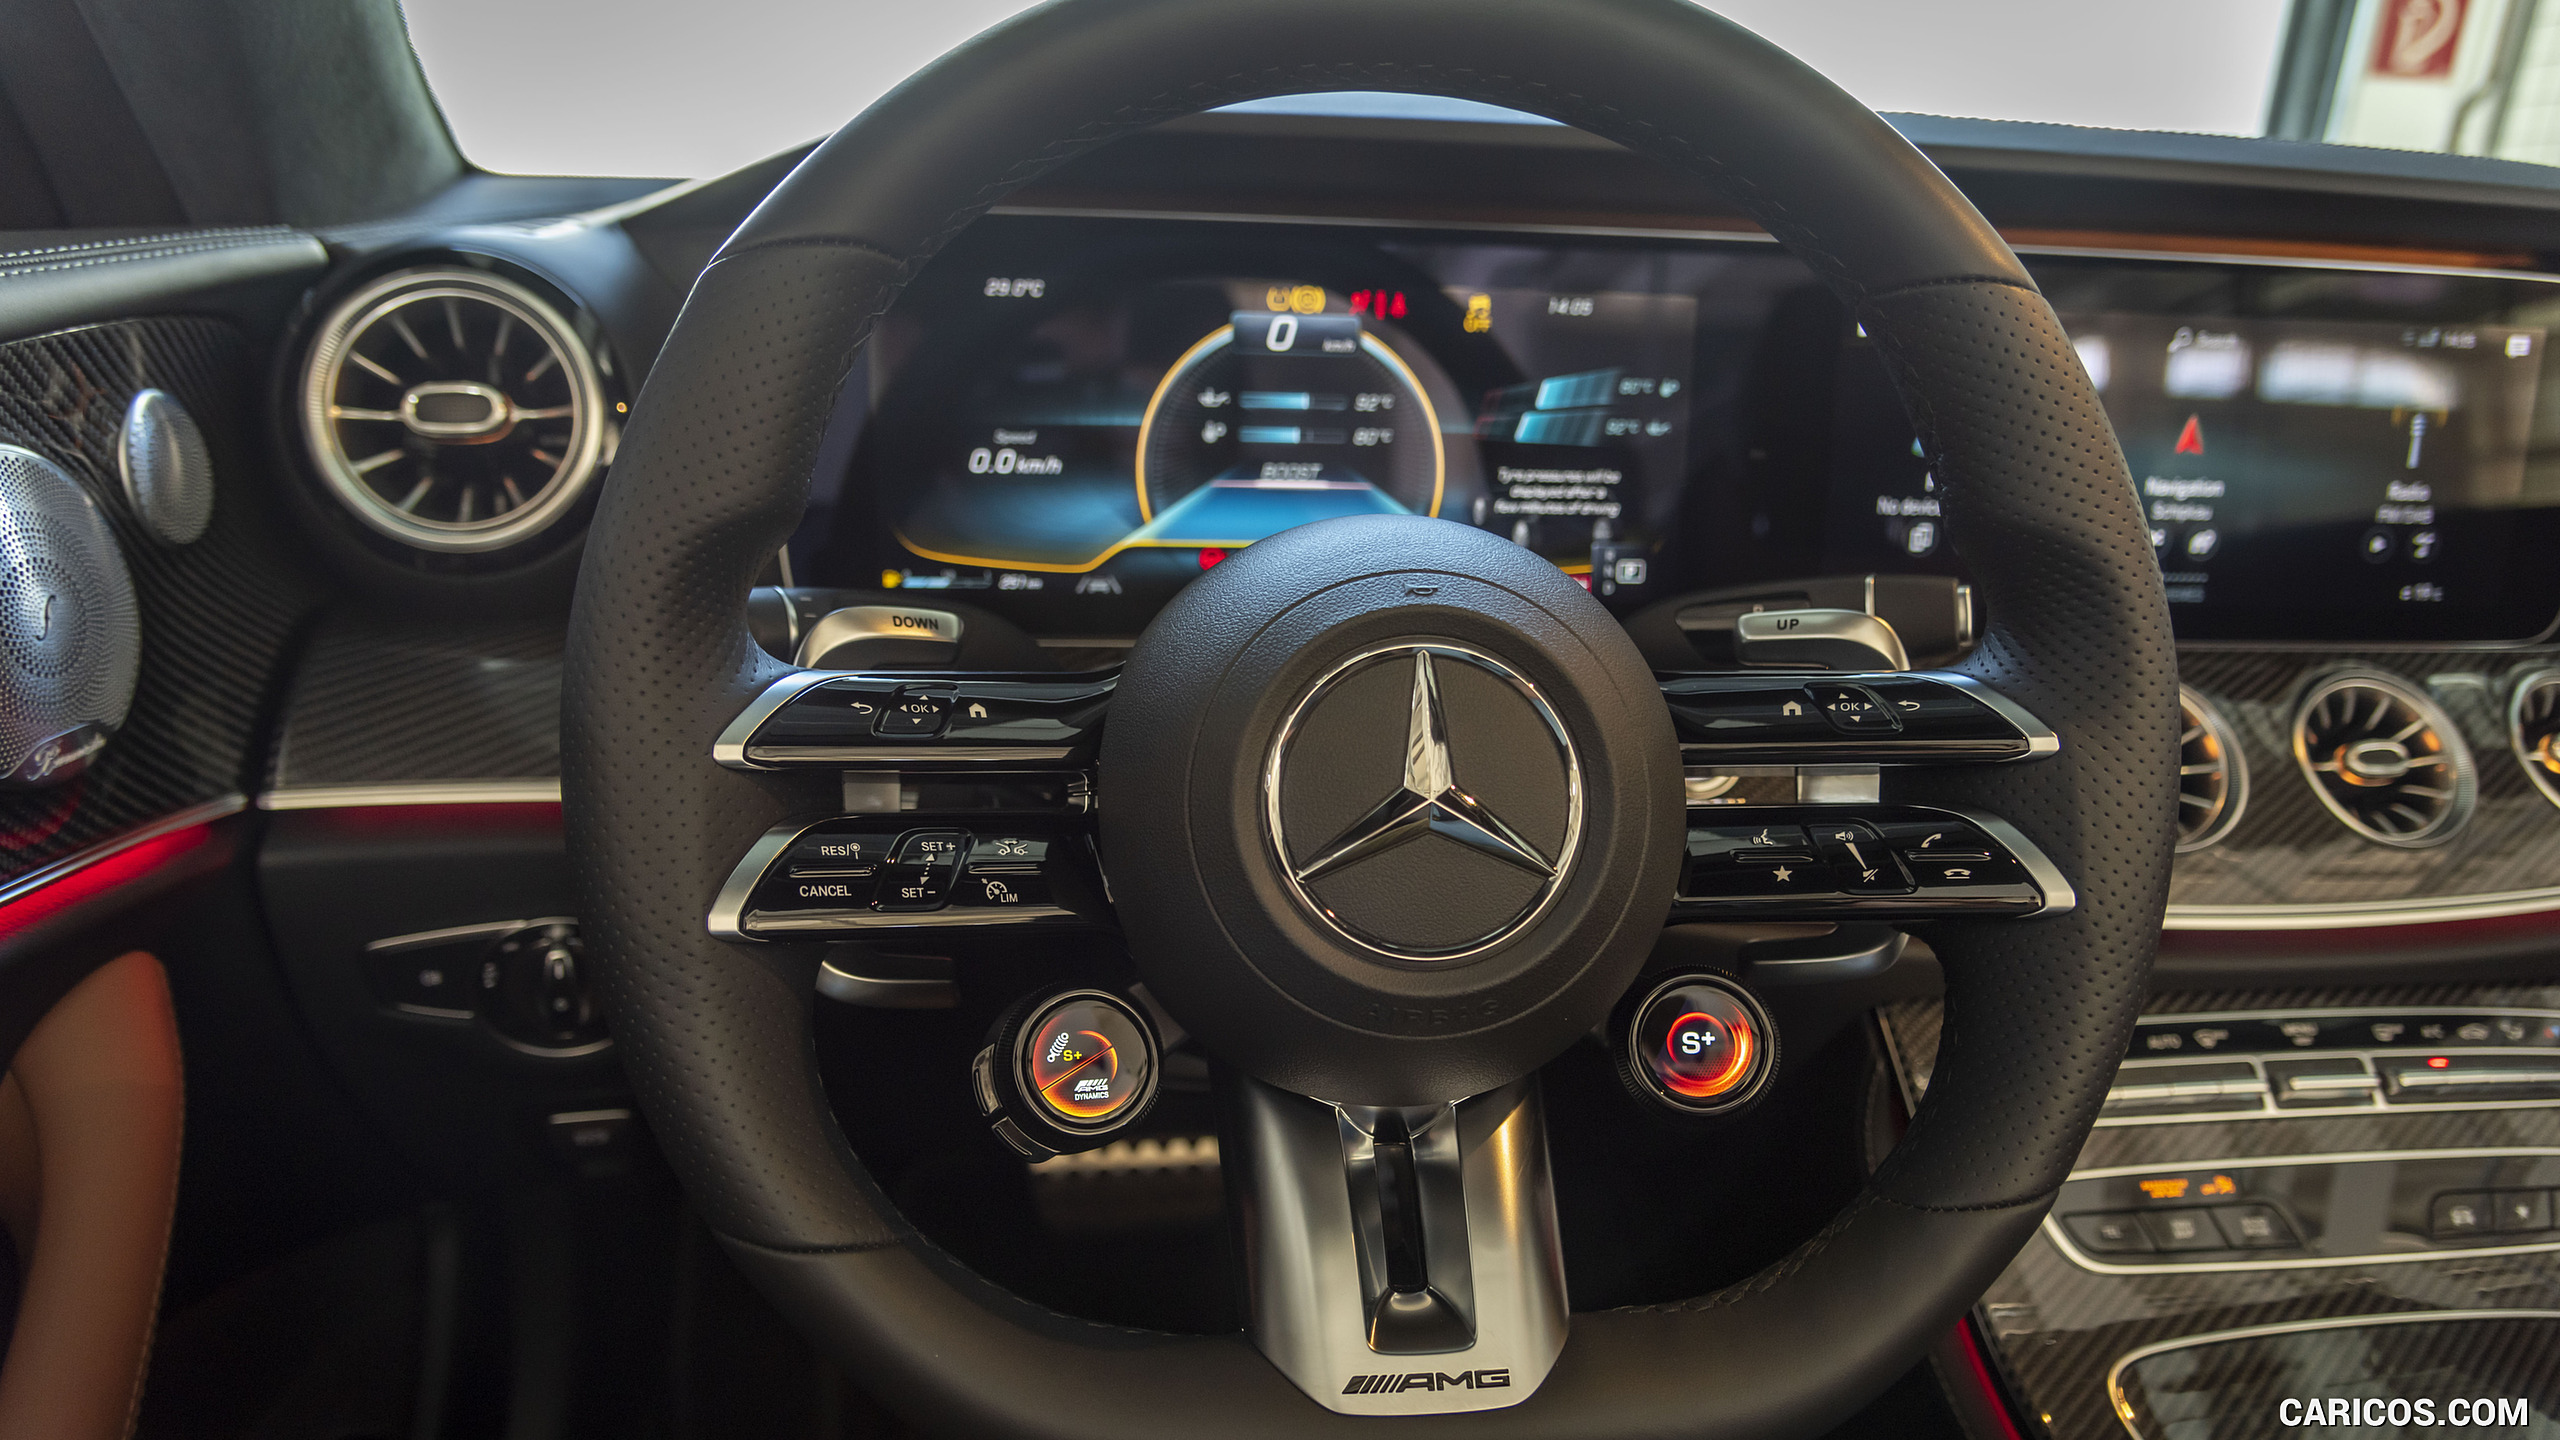 2021 Mercedes-AMG E 53 4MATIC+ Cabriolet - Interior, Steering Wheel, #73 of 166